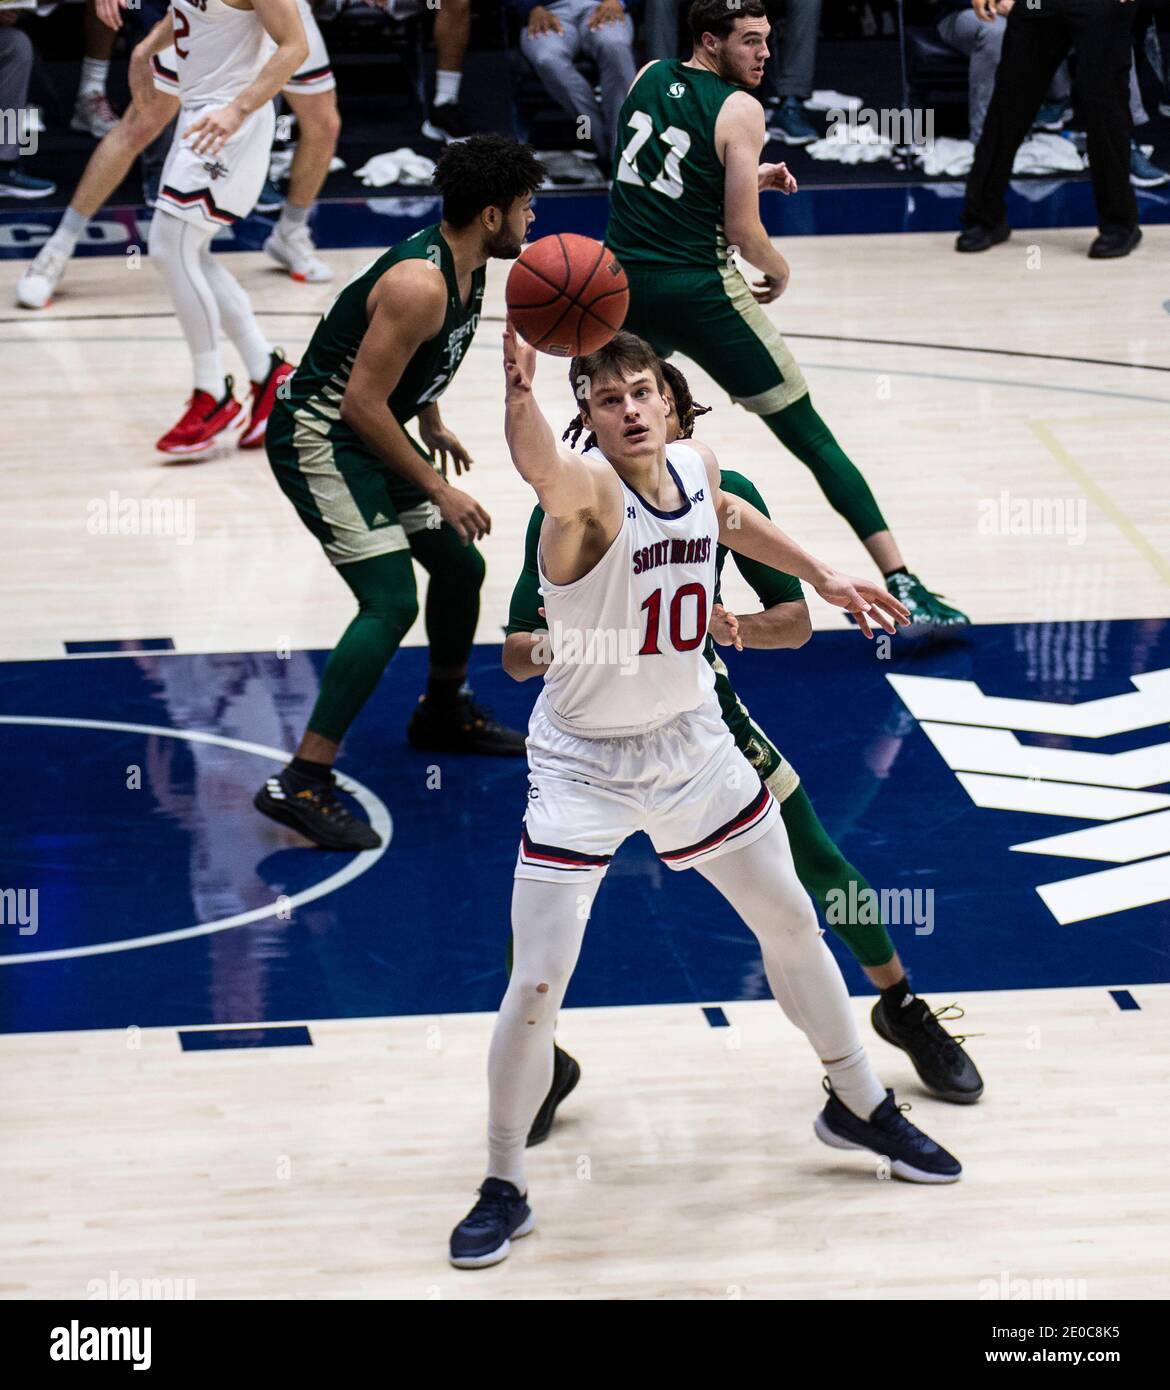 Moraga, CA U.S. 30th Dec, 2020. A. St. Mary's Gaels center Mitchell Saxen (10) grabs the ball during the NCAA Men's Basketball game between Sacramento State Hornets and the Saint Mary's Gaels 63-45 win at McKeon Pavilion Moraga Calif. Thurman James/CSM/Alamy Live News Stock Photo